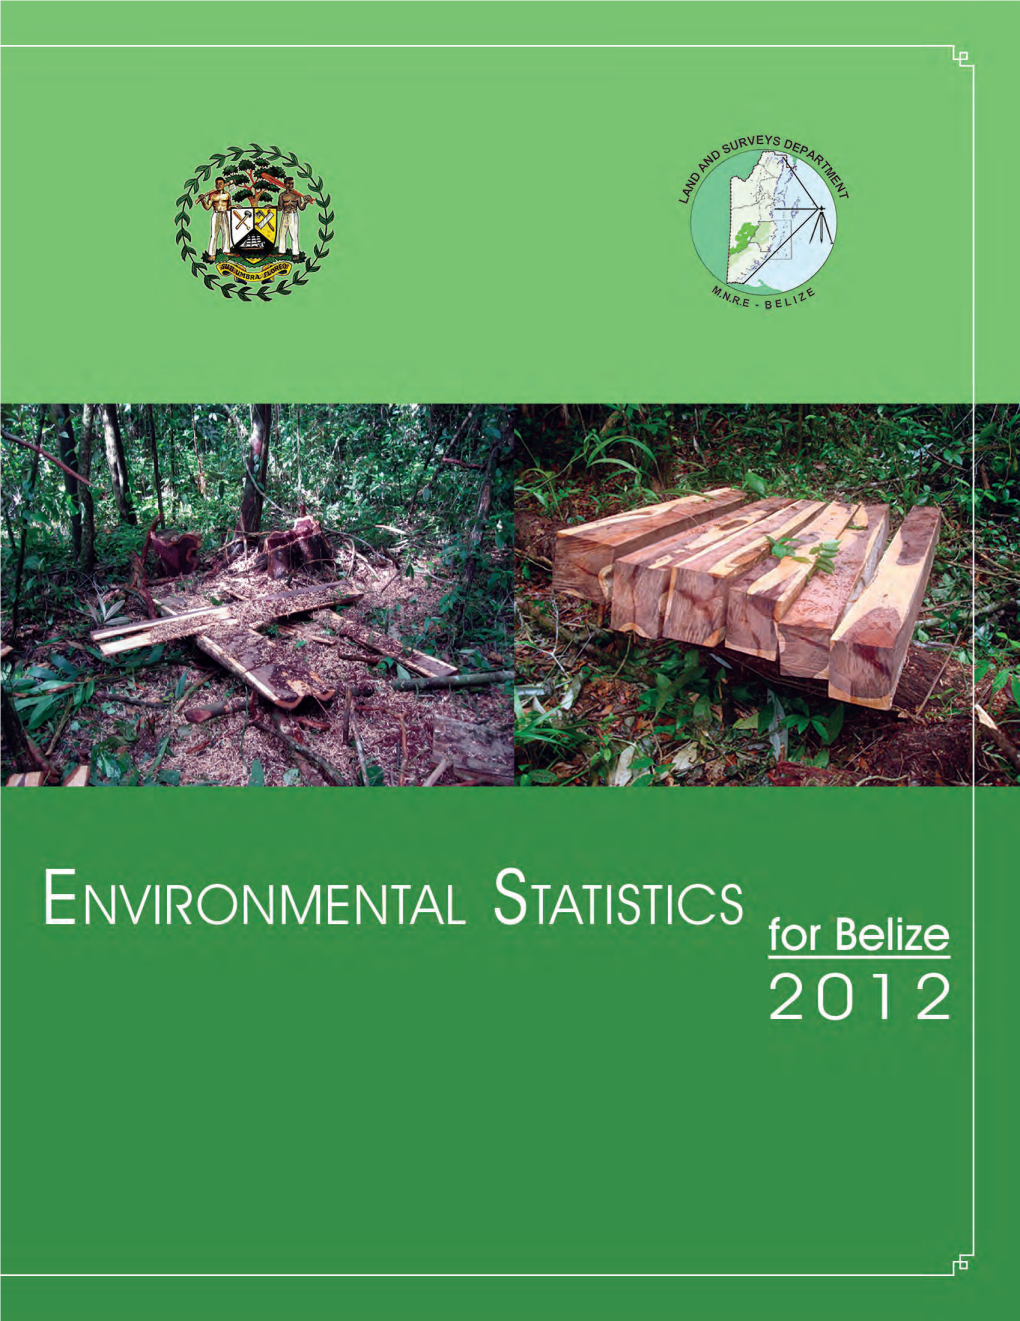 Environmental Statistics for Belize, 2012 Is the Sixth Edition to Be Produced in Belize and Contains Data Set Corresponding to the Year 2010